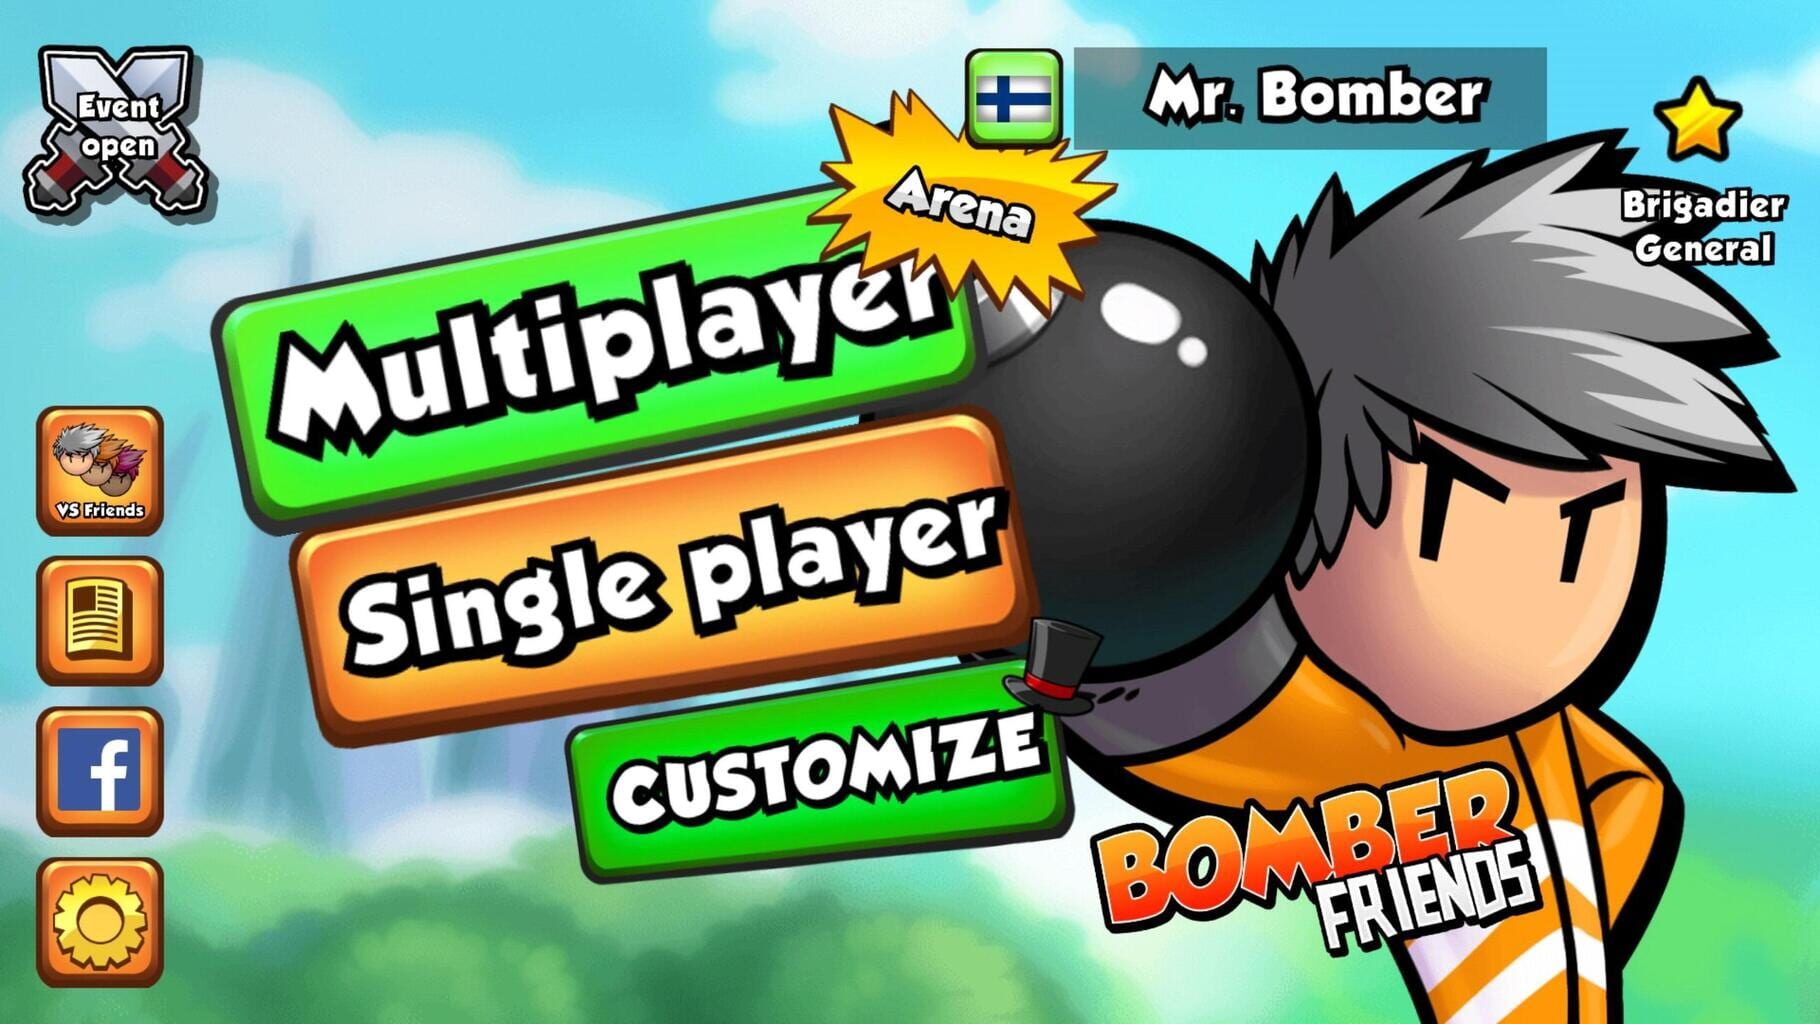 Bomber Friends - Apps on Google Play